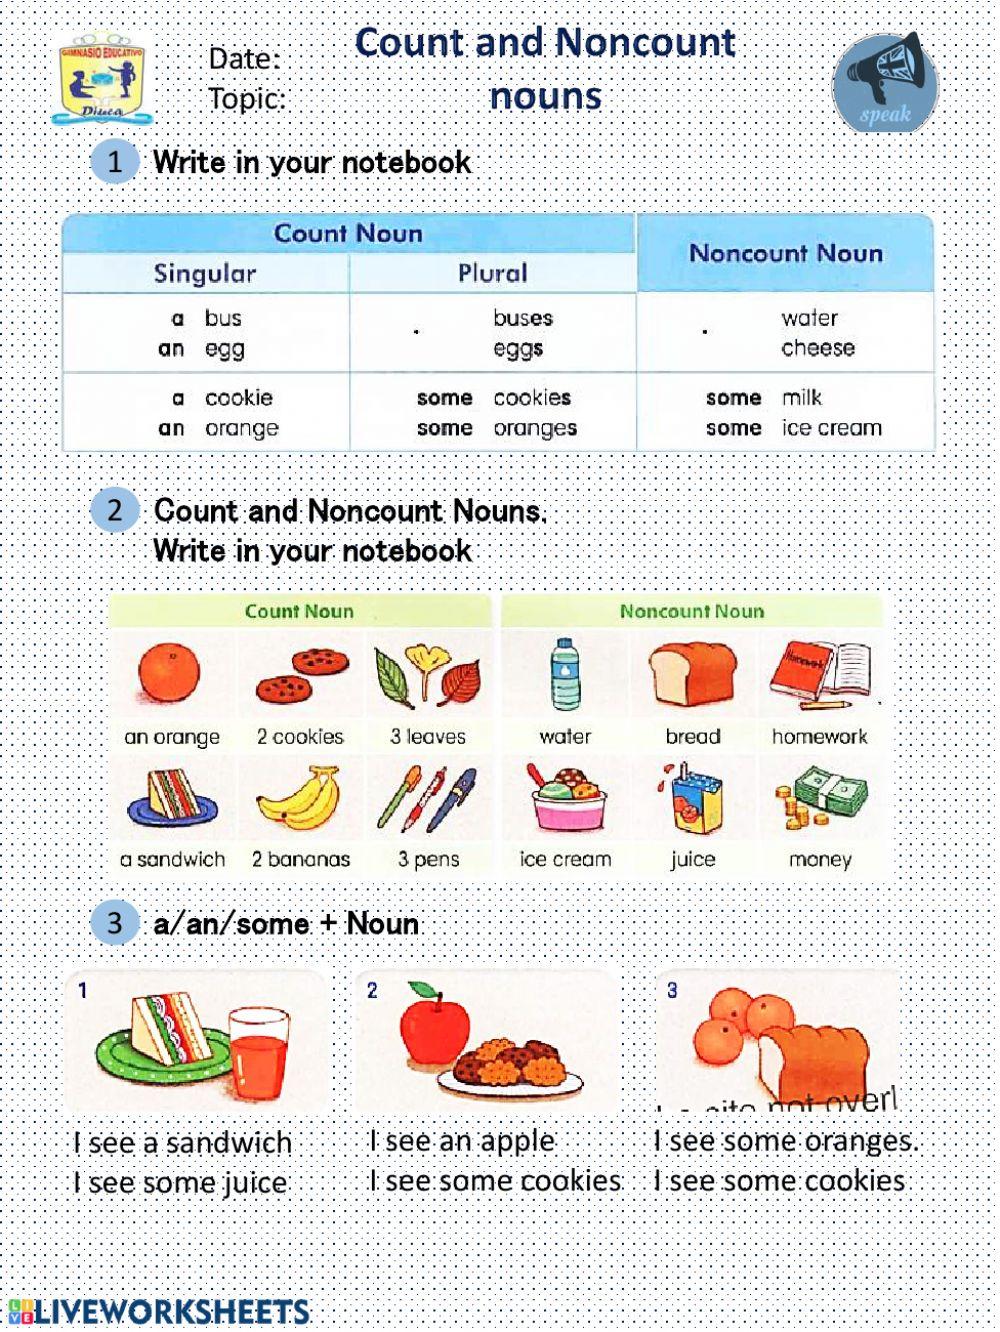 Count and noncount nouns